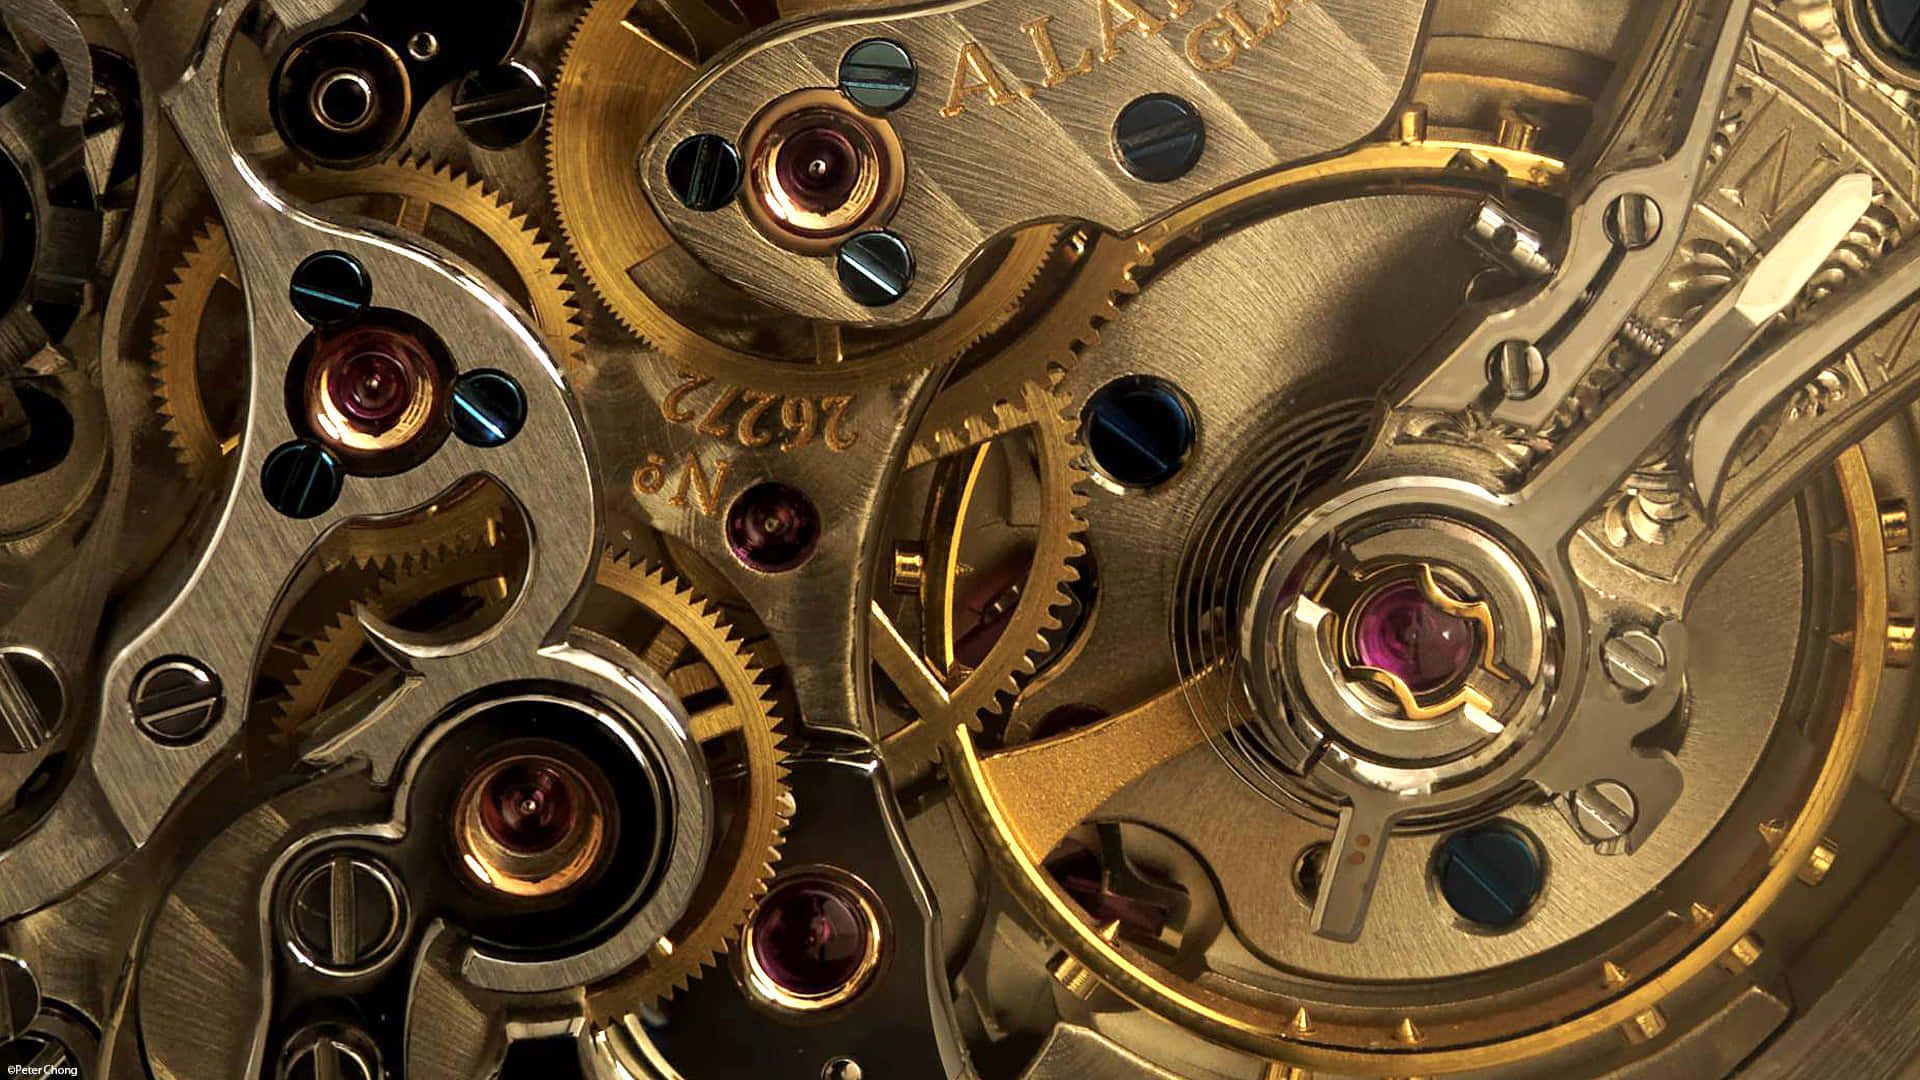 The mechanism of the watch. - Steampunk